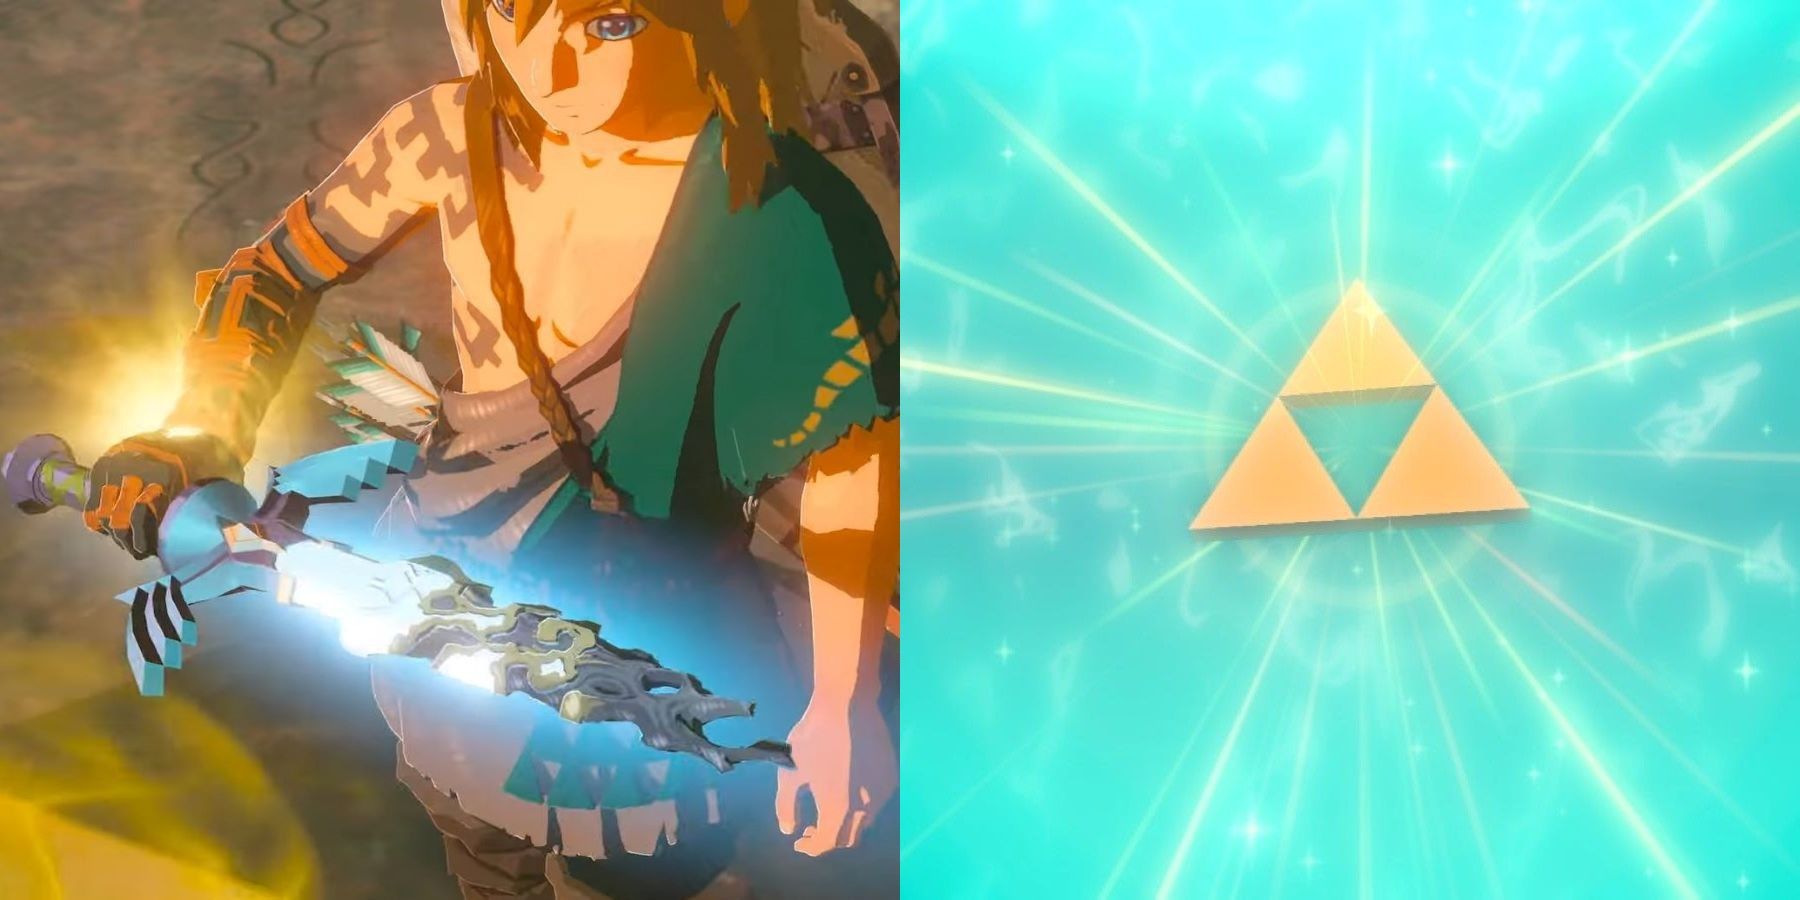 The Triforce in Wind Waker and Link holding Breath of the Wild 2's damaged Master Sword